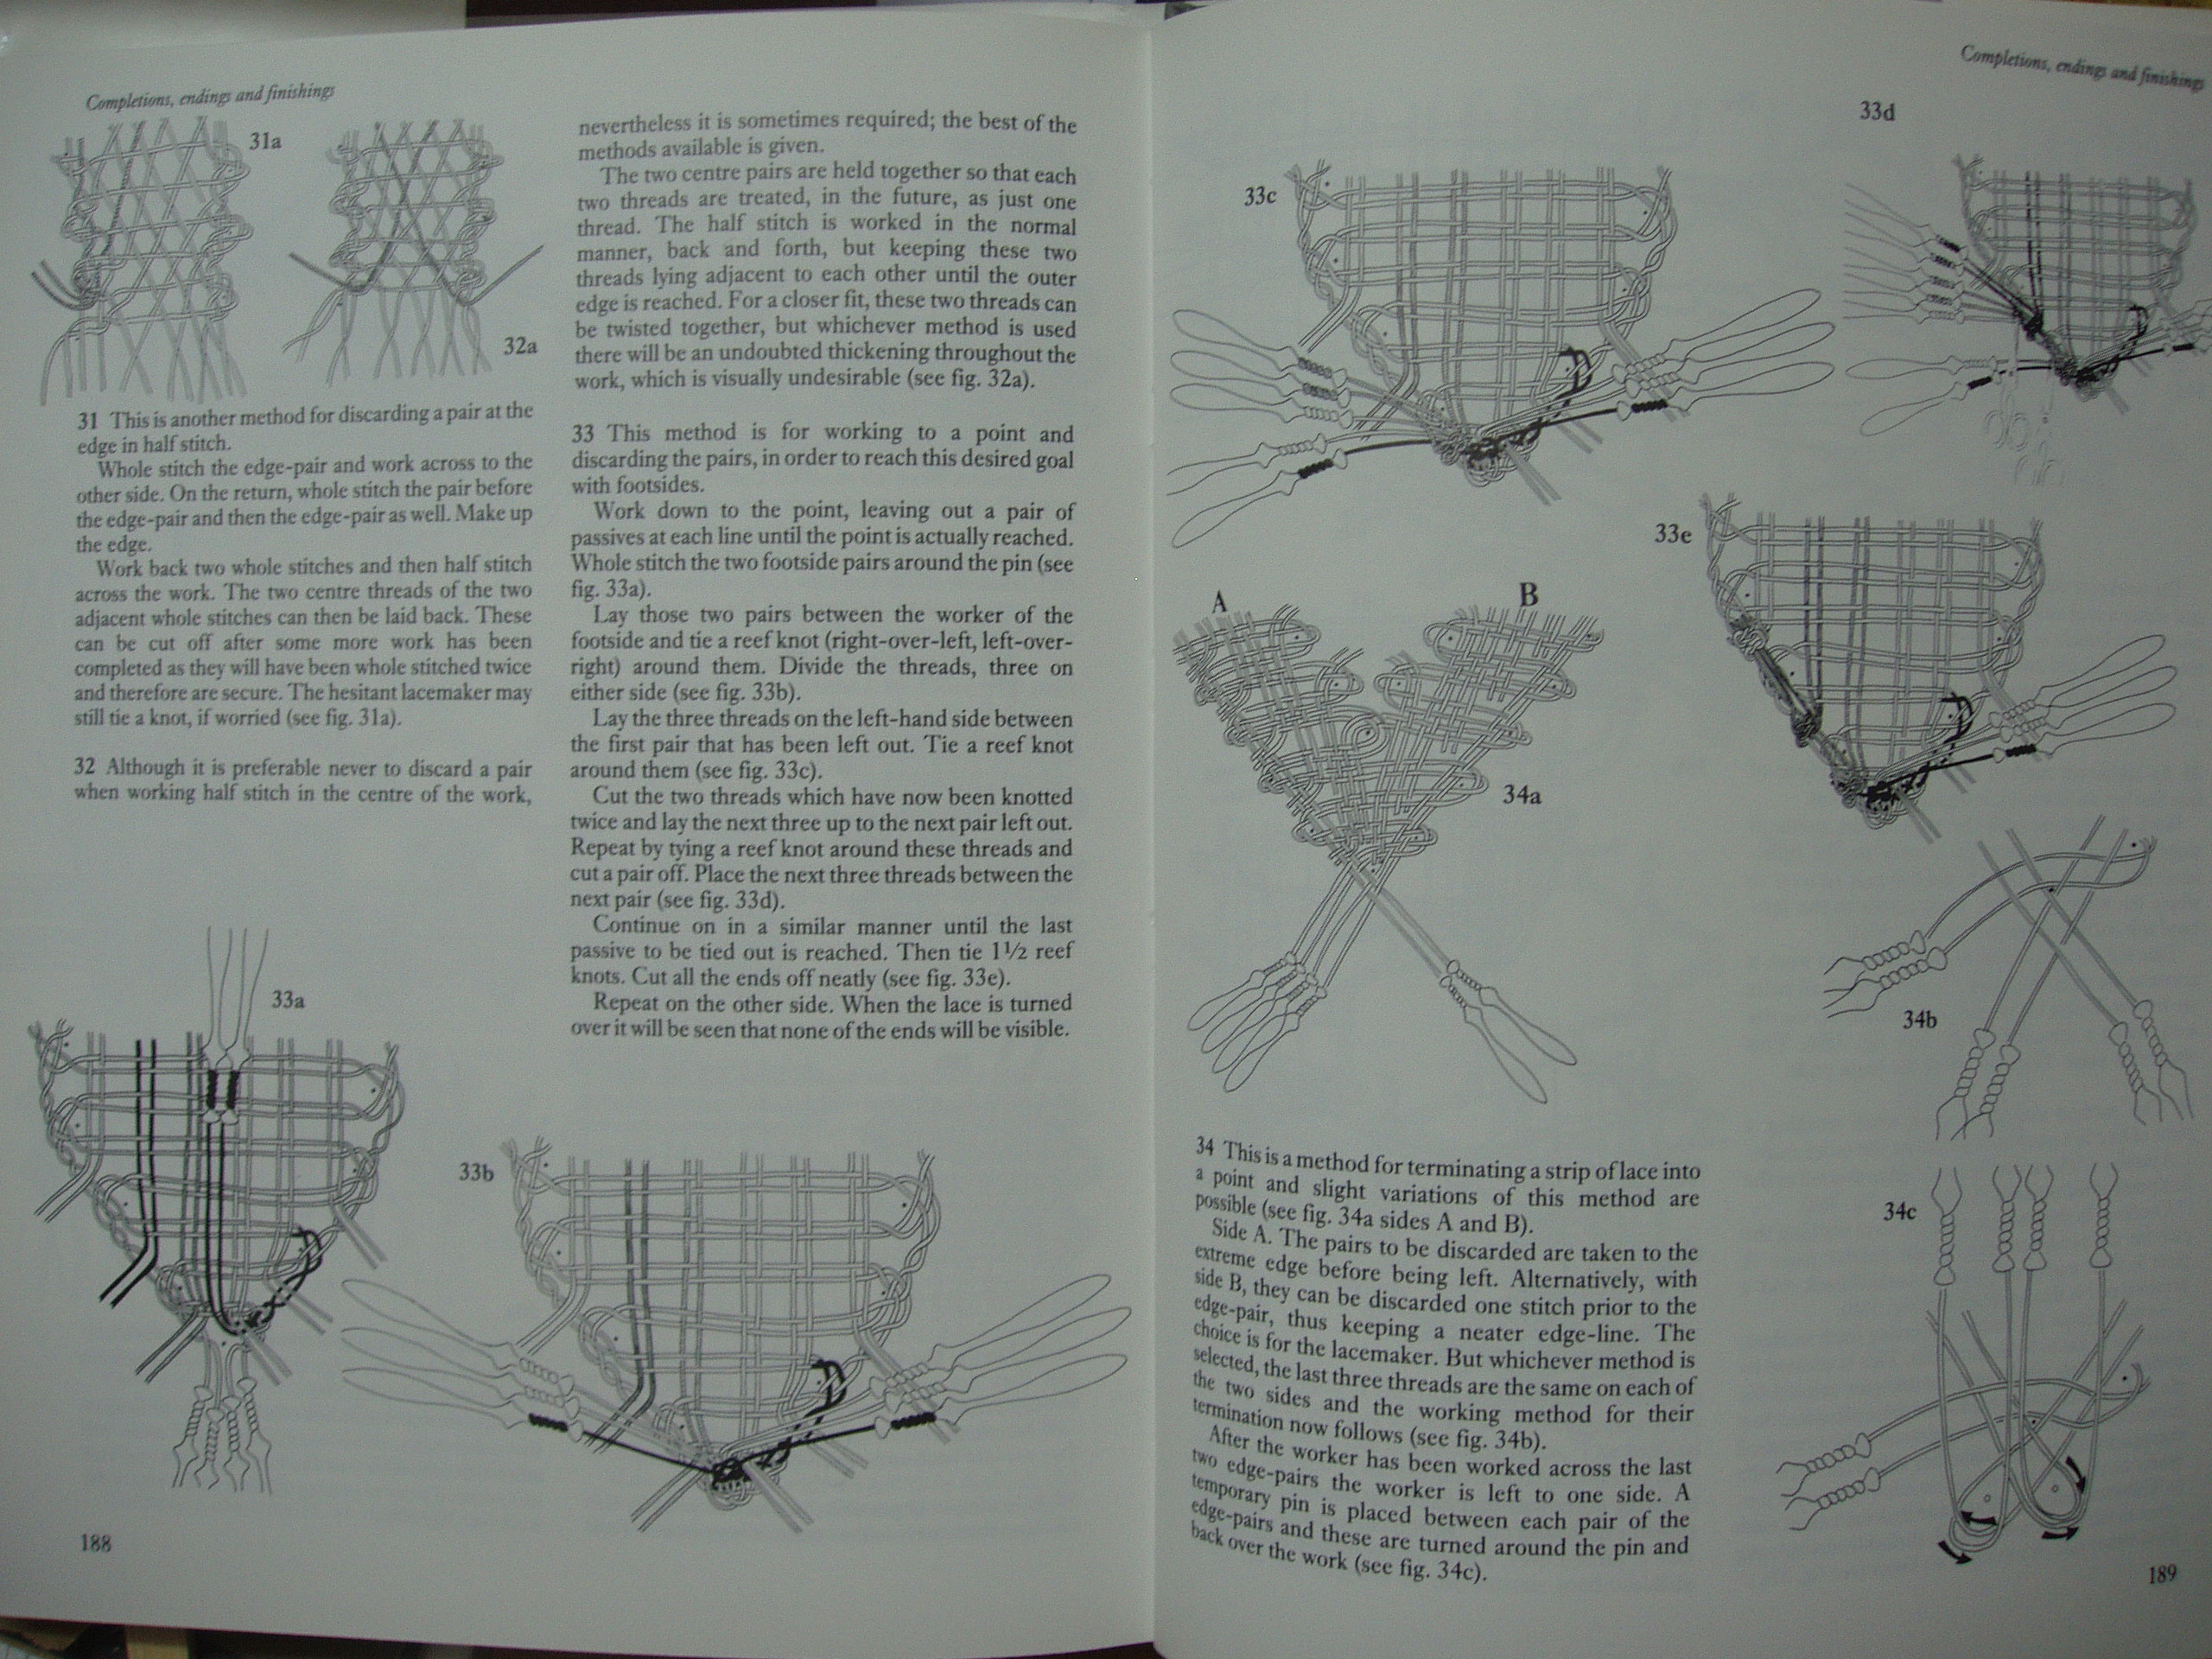 worksofhands´ Library | My library of needlework books